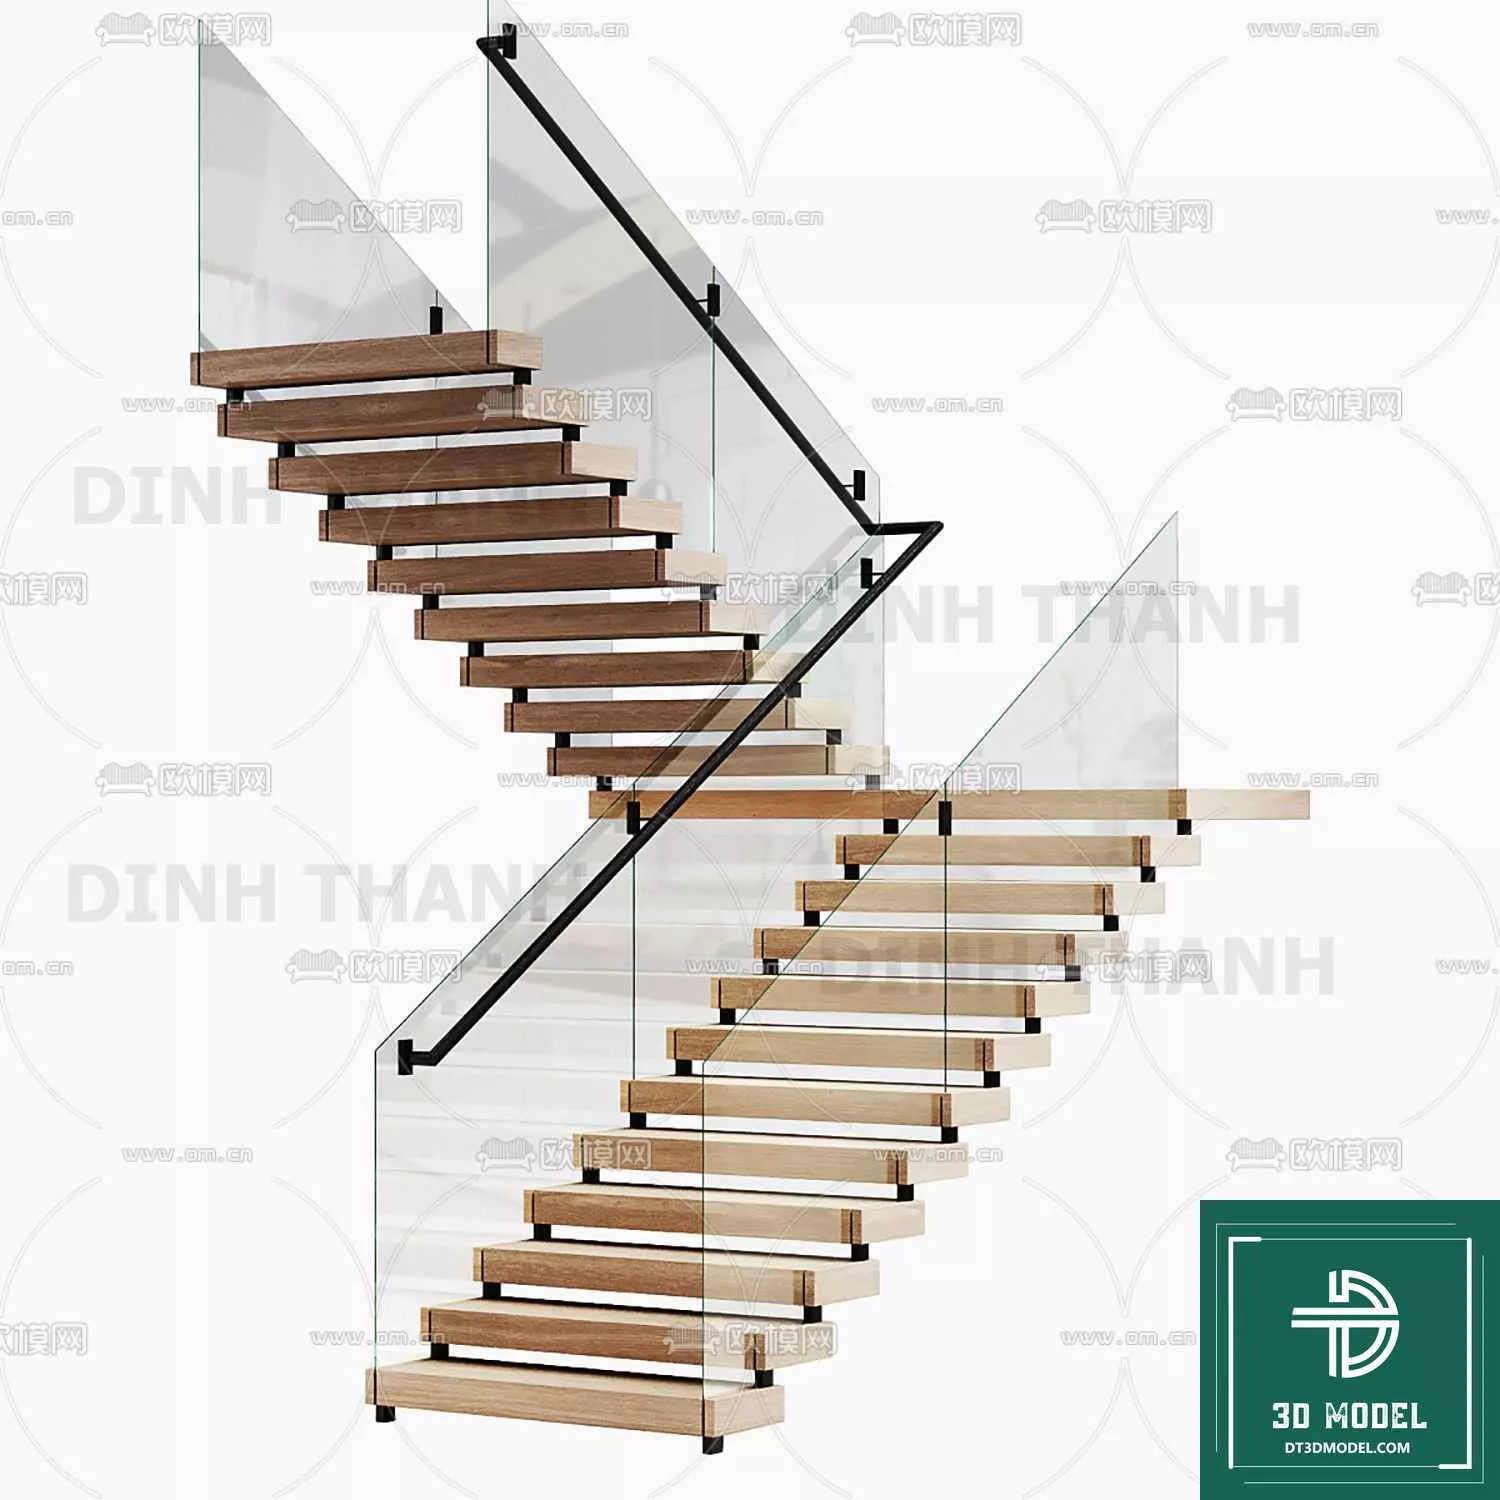 MODERN STAIR - SKETCHUP 3D MODEL - VRAY OR ENSCAPE - ID14271